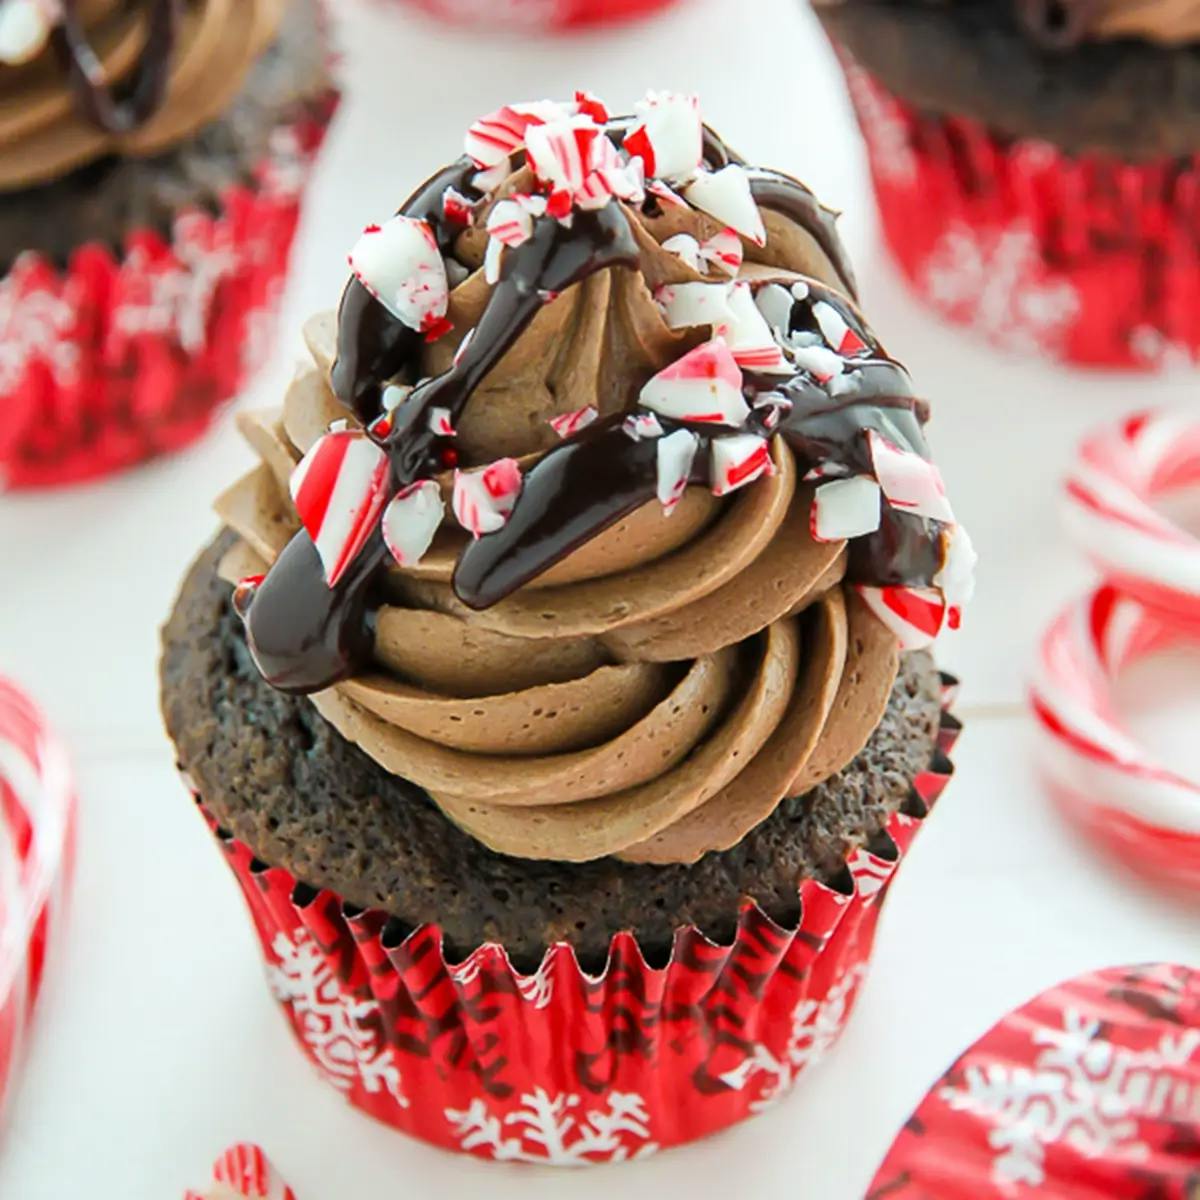 A chocolate cupcake covered in creamy light chocolate frosting, drizzled in dark chocolate sauce and sprinkled with crushed candy canes, with more blurred cupcakes in the background.